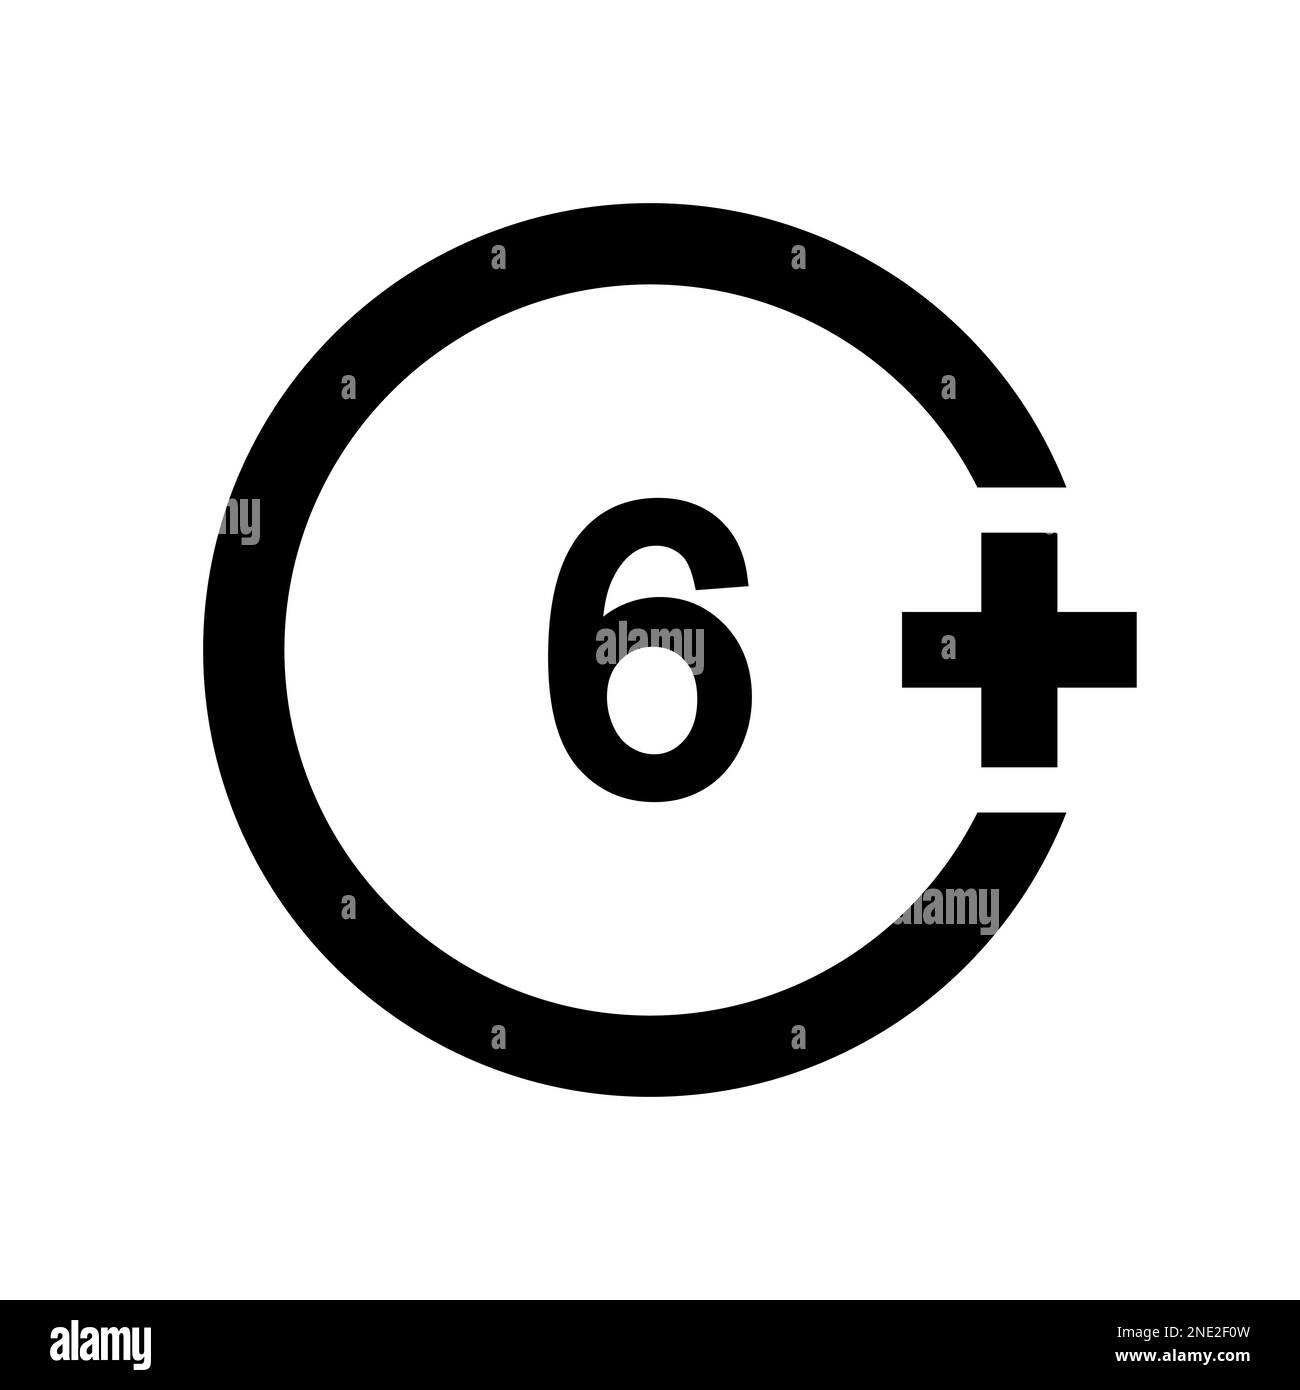 Six plus icon. Number 6 in circle isolated on white background. Age censor symbol. Movie viewing age limit label. Vector graphic illustration Stock Vector